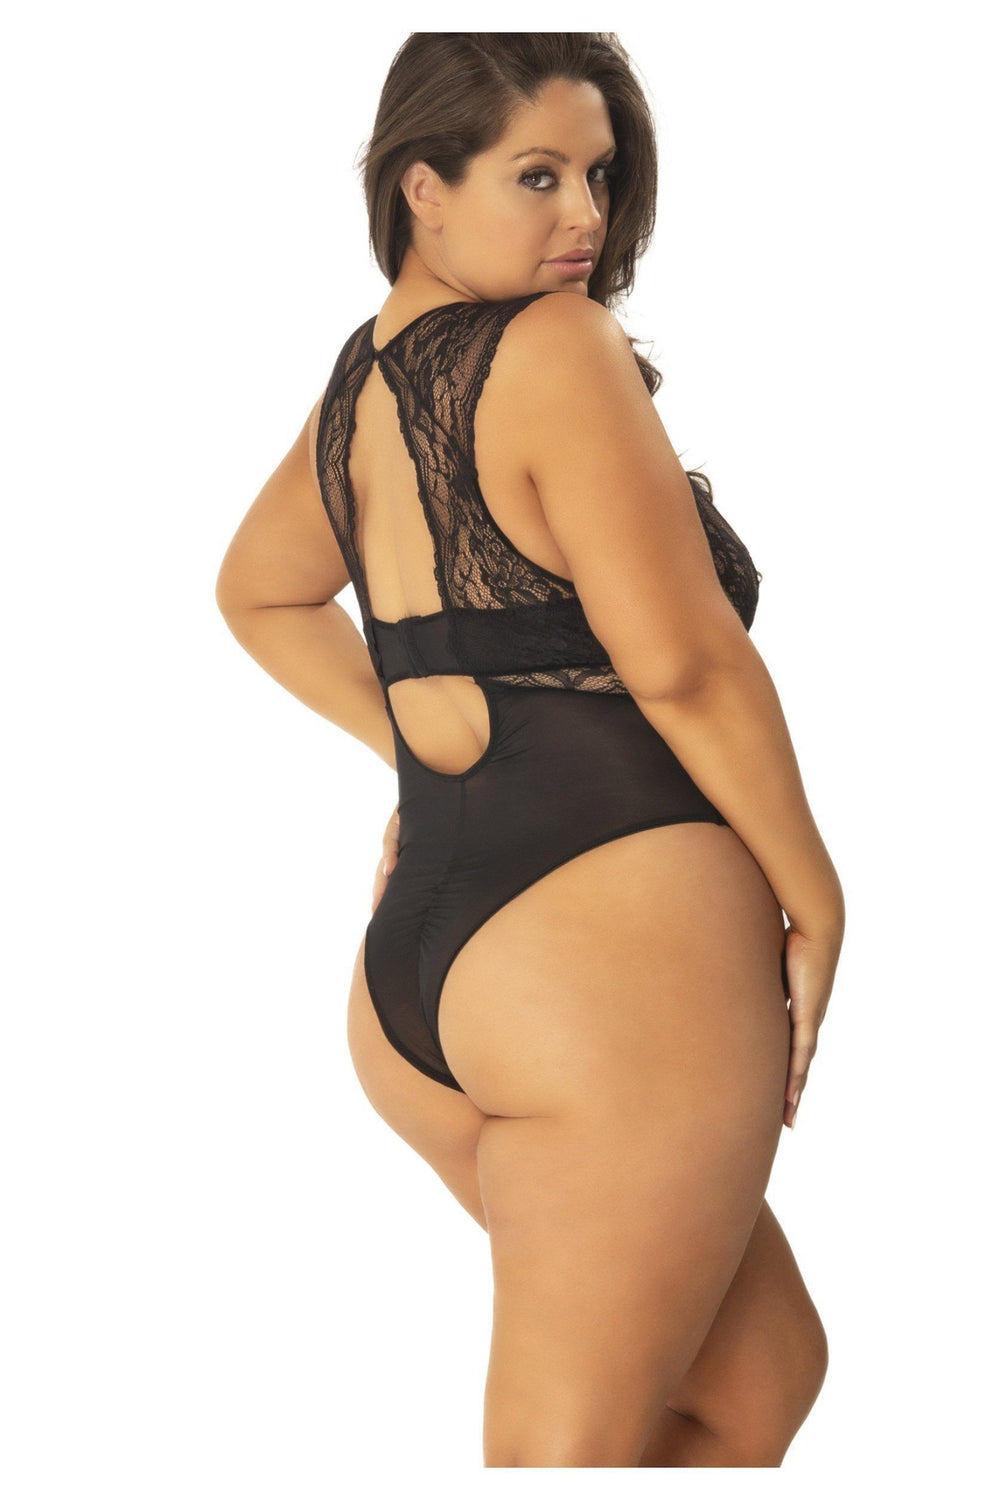 Plus Size Dramatic Scalloped Edge Lace Teddy With High Apex Cups, Cap Sleeves, And Mesh Back-Oh La La Cheri-SEXYSHOES.COM